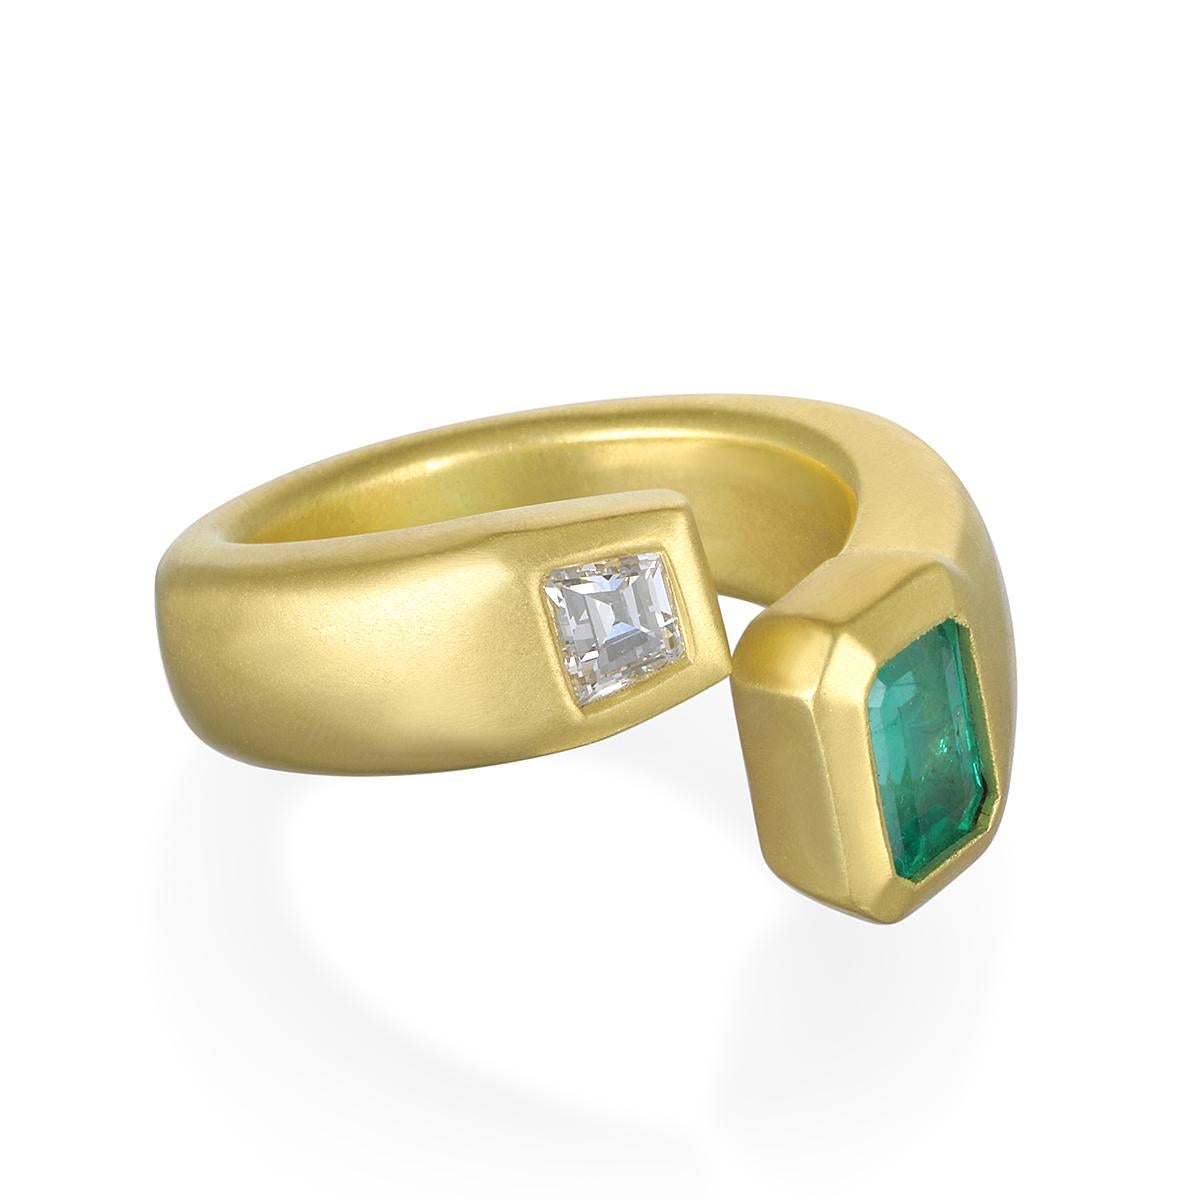 Make a statement with this spectacular Brazilian Emerald and Trapezoid Diamond Open Wrap Ring. Comprising 18 karat matte gold, it would be perfect worn on any finger.

Emerald: .90 Carats
Diamond: .31 Carats 
Bezel taper 10mm x 6.5mm
Size 7, ring